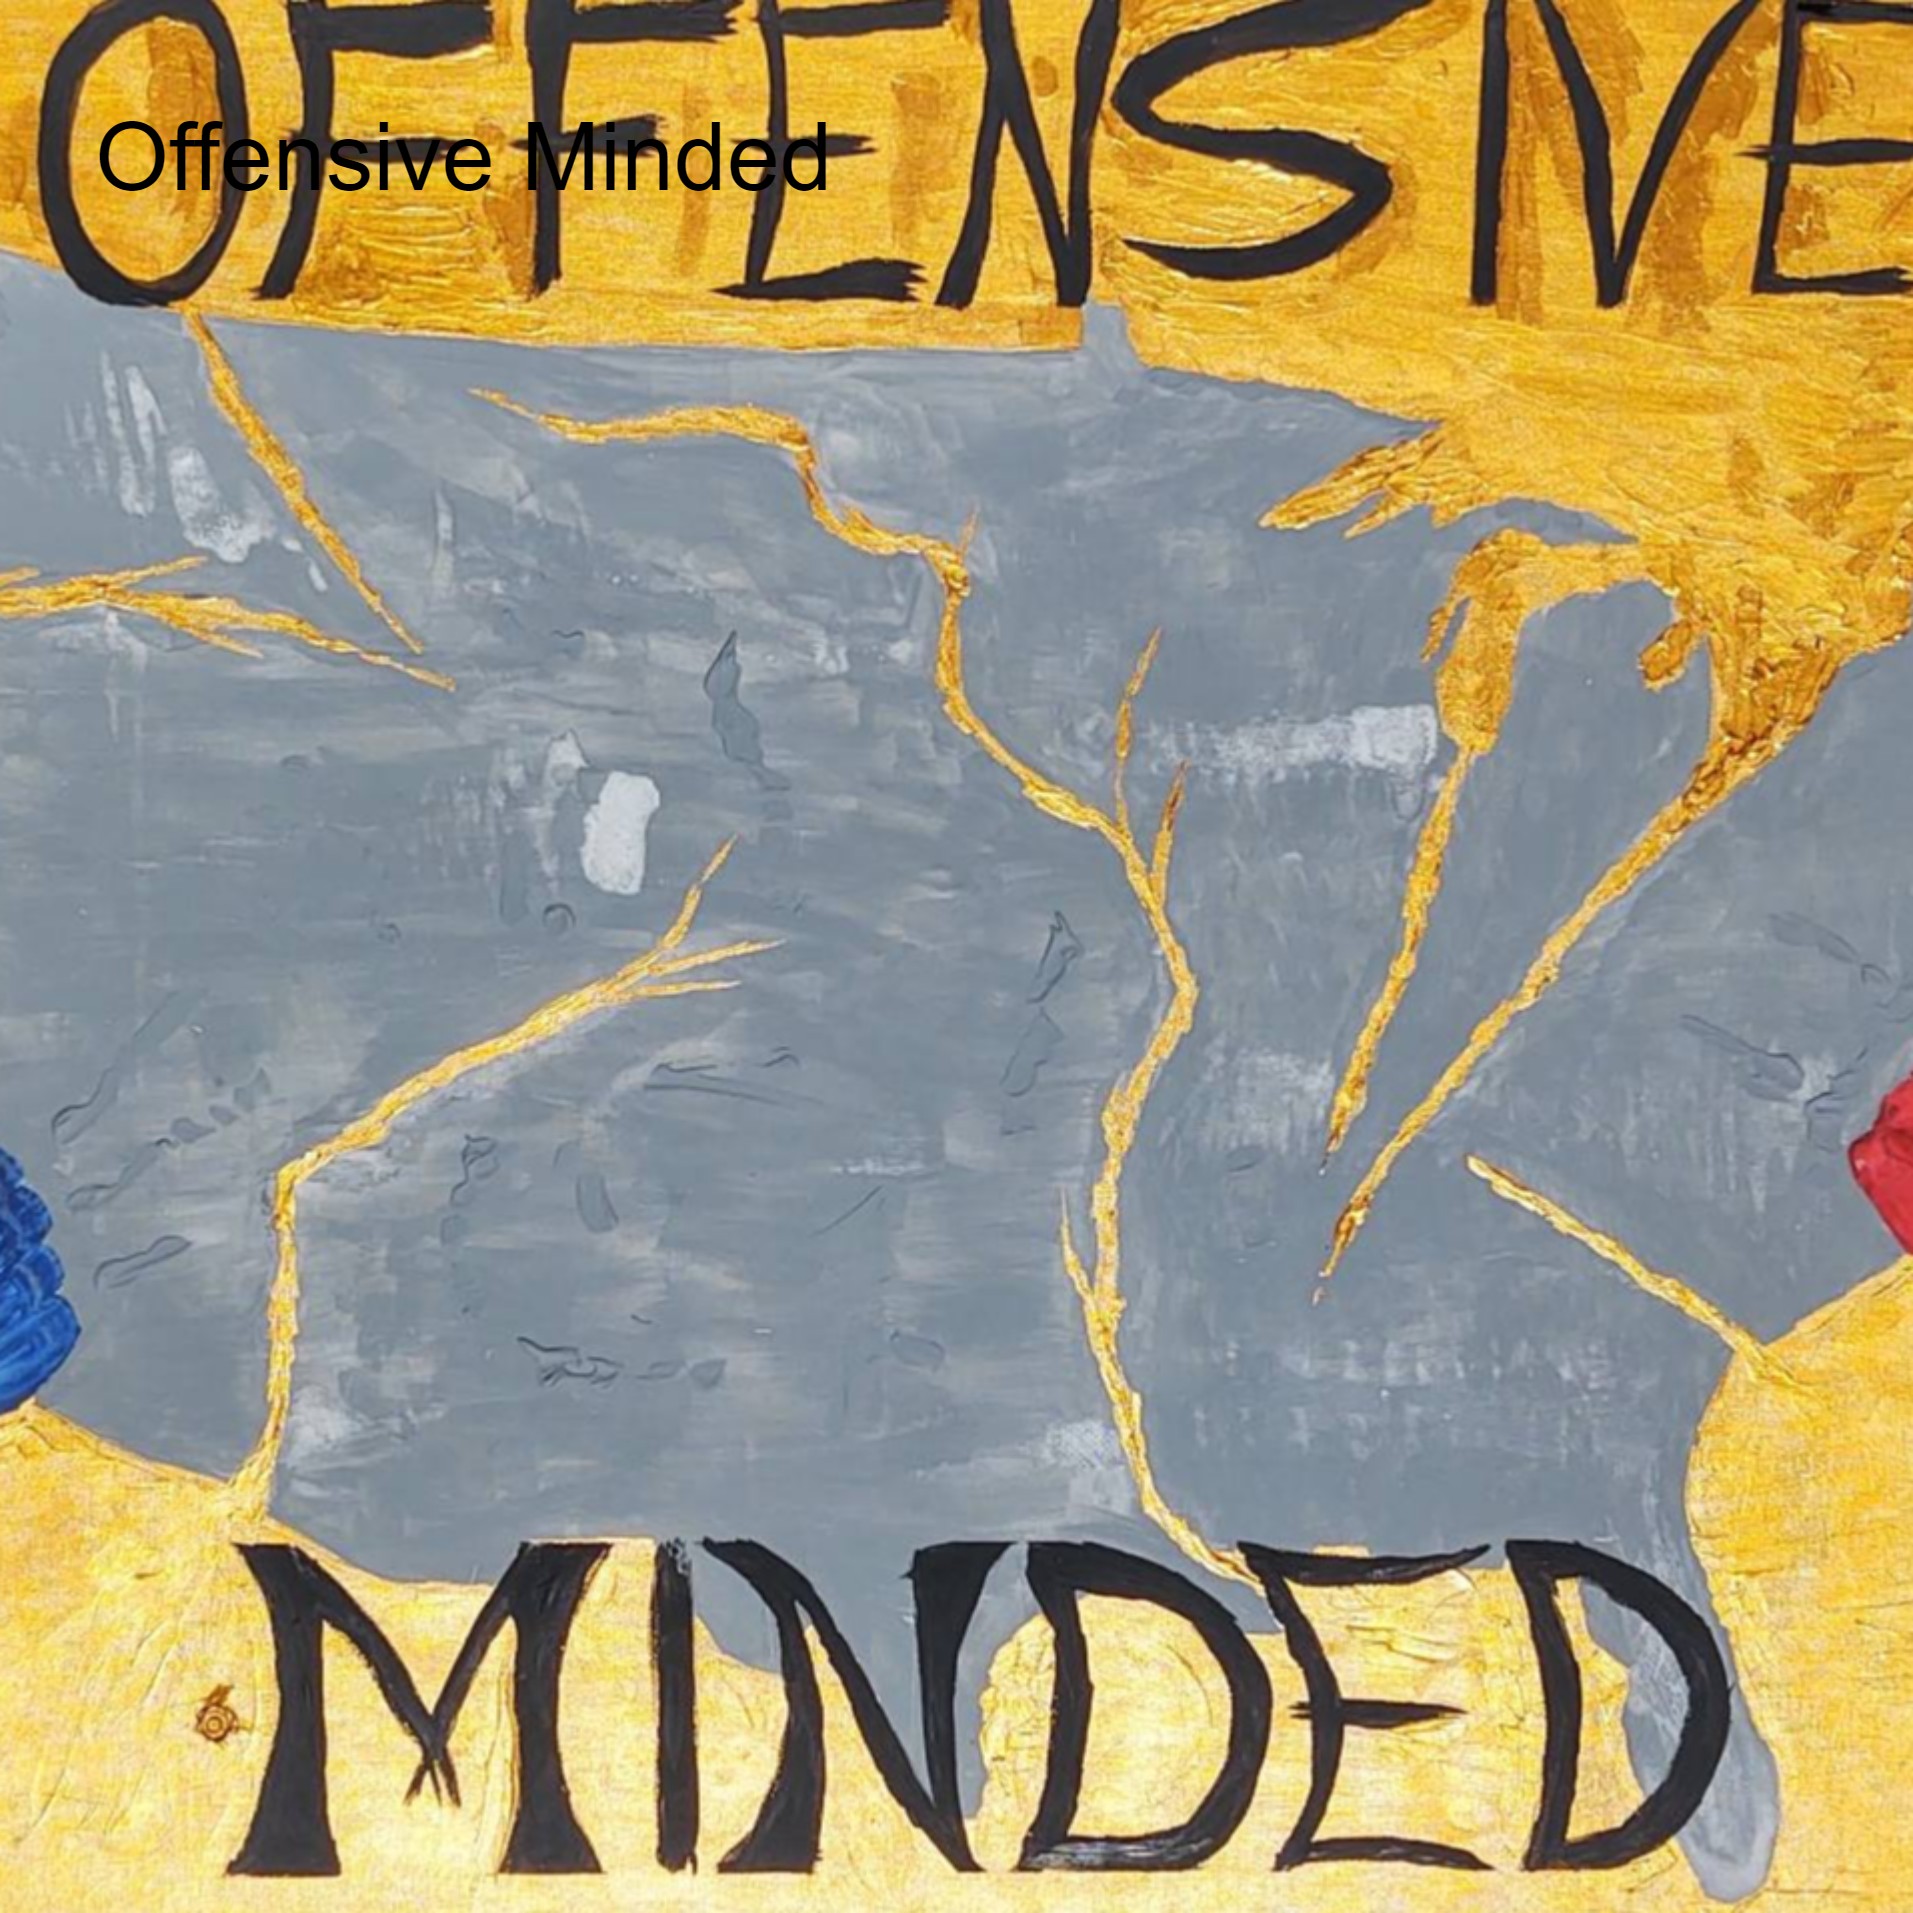 Offensive Minded